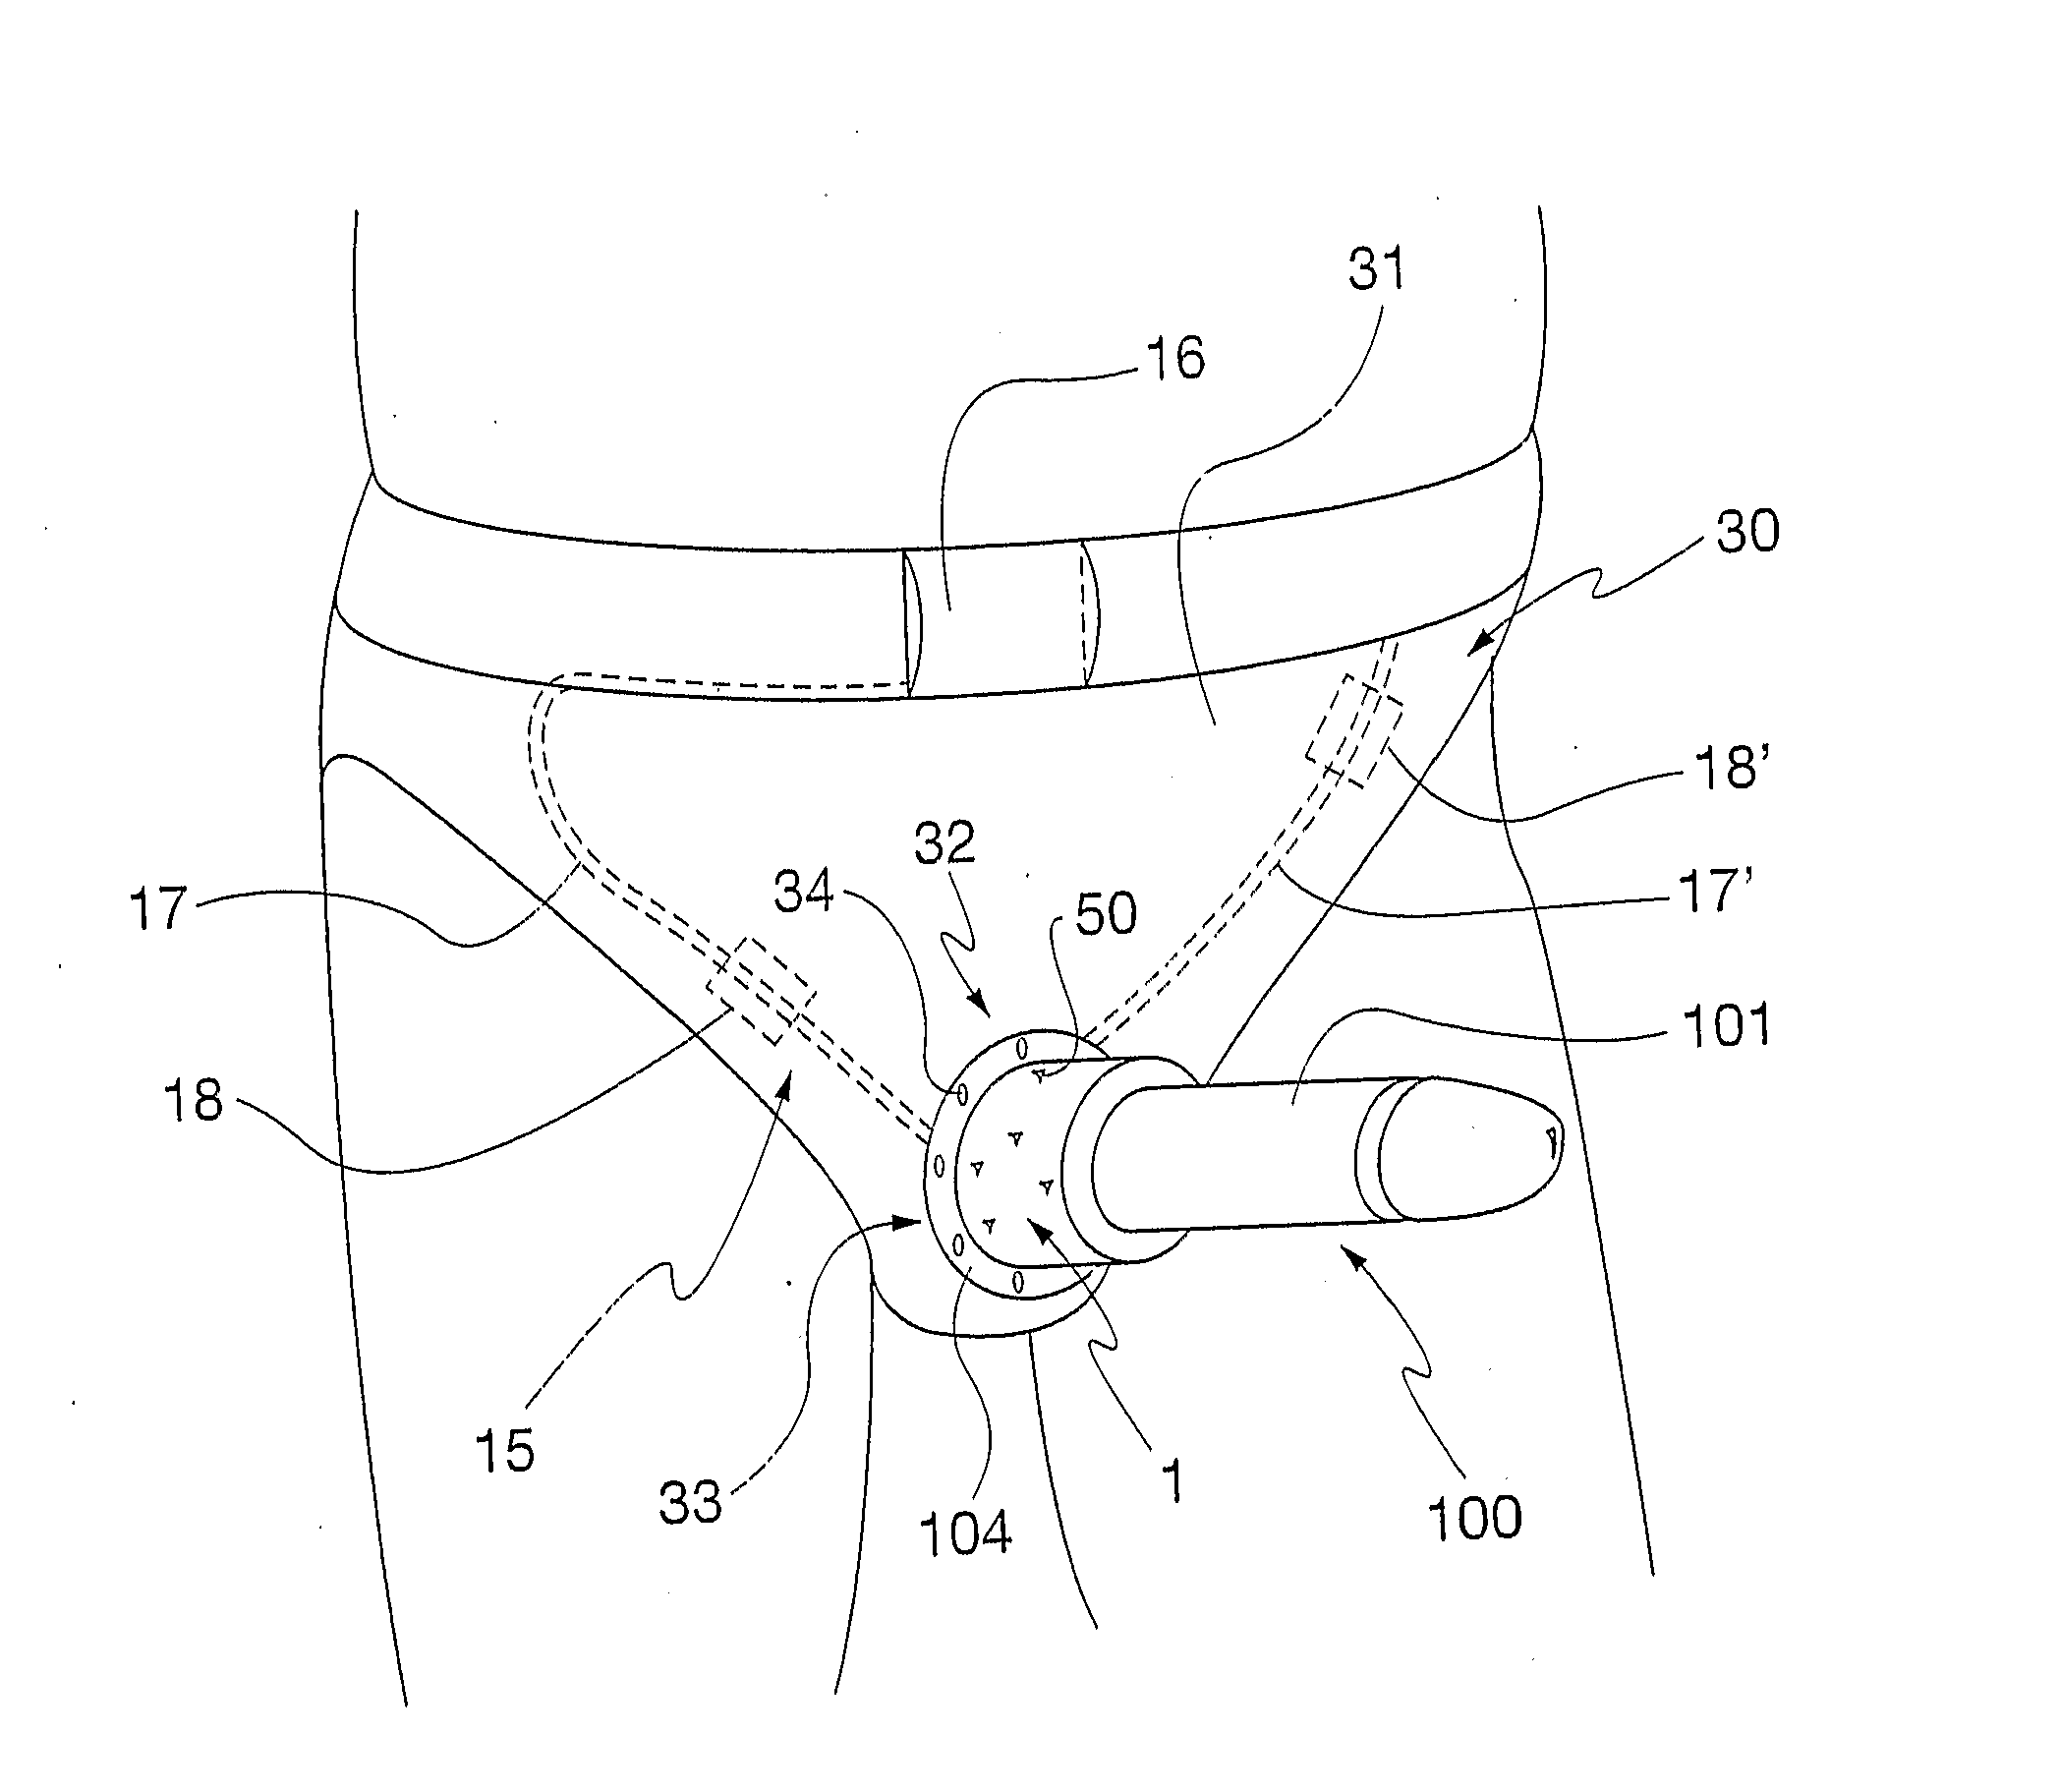 Device for carrying out a sexual act